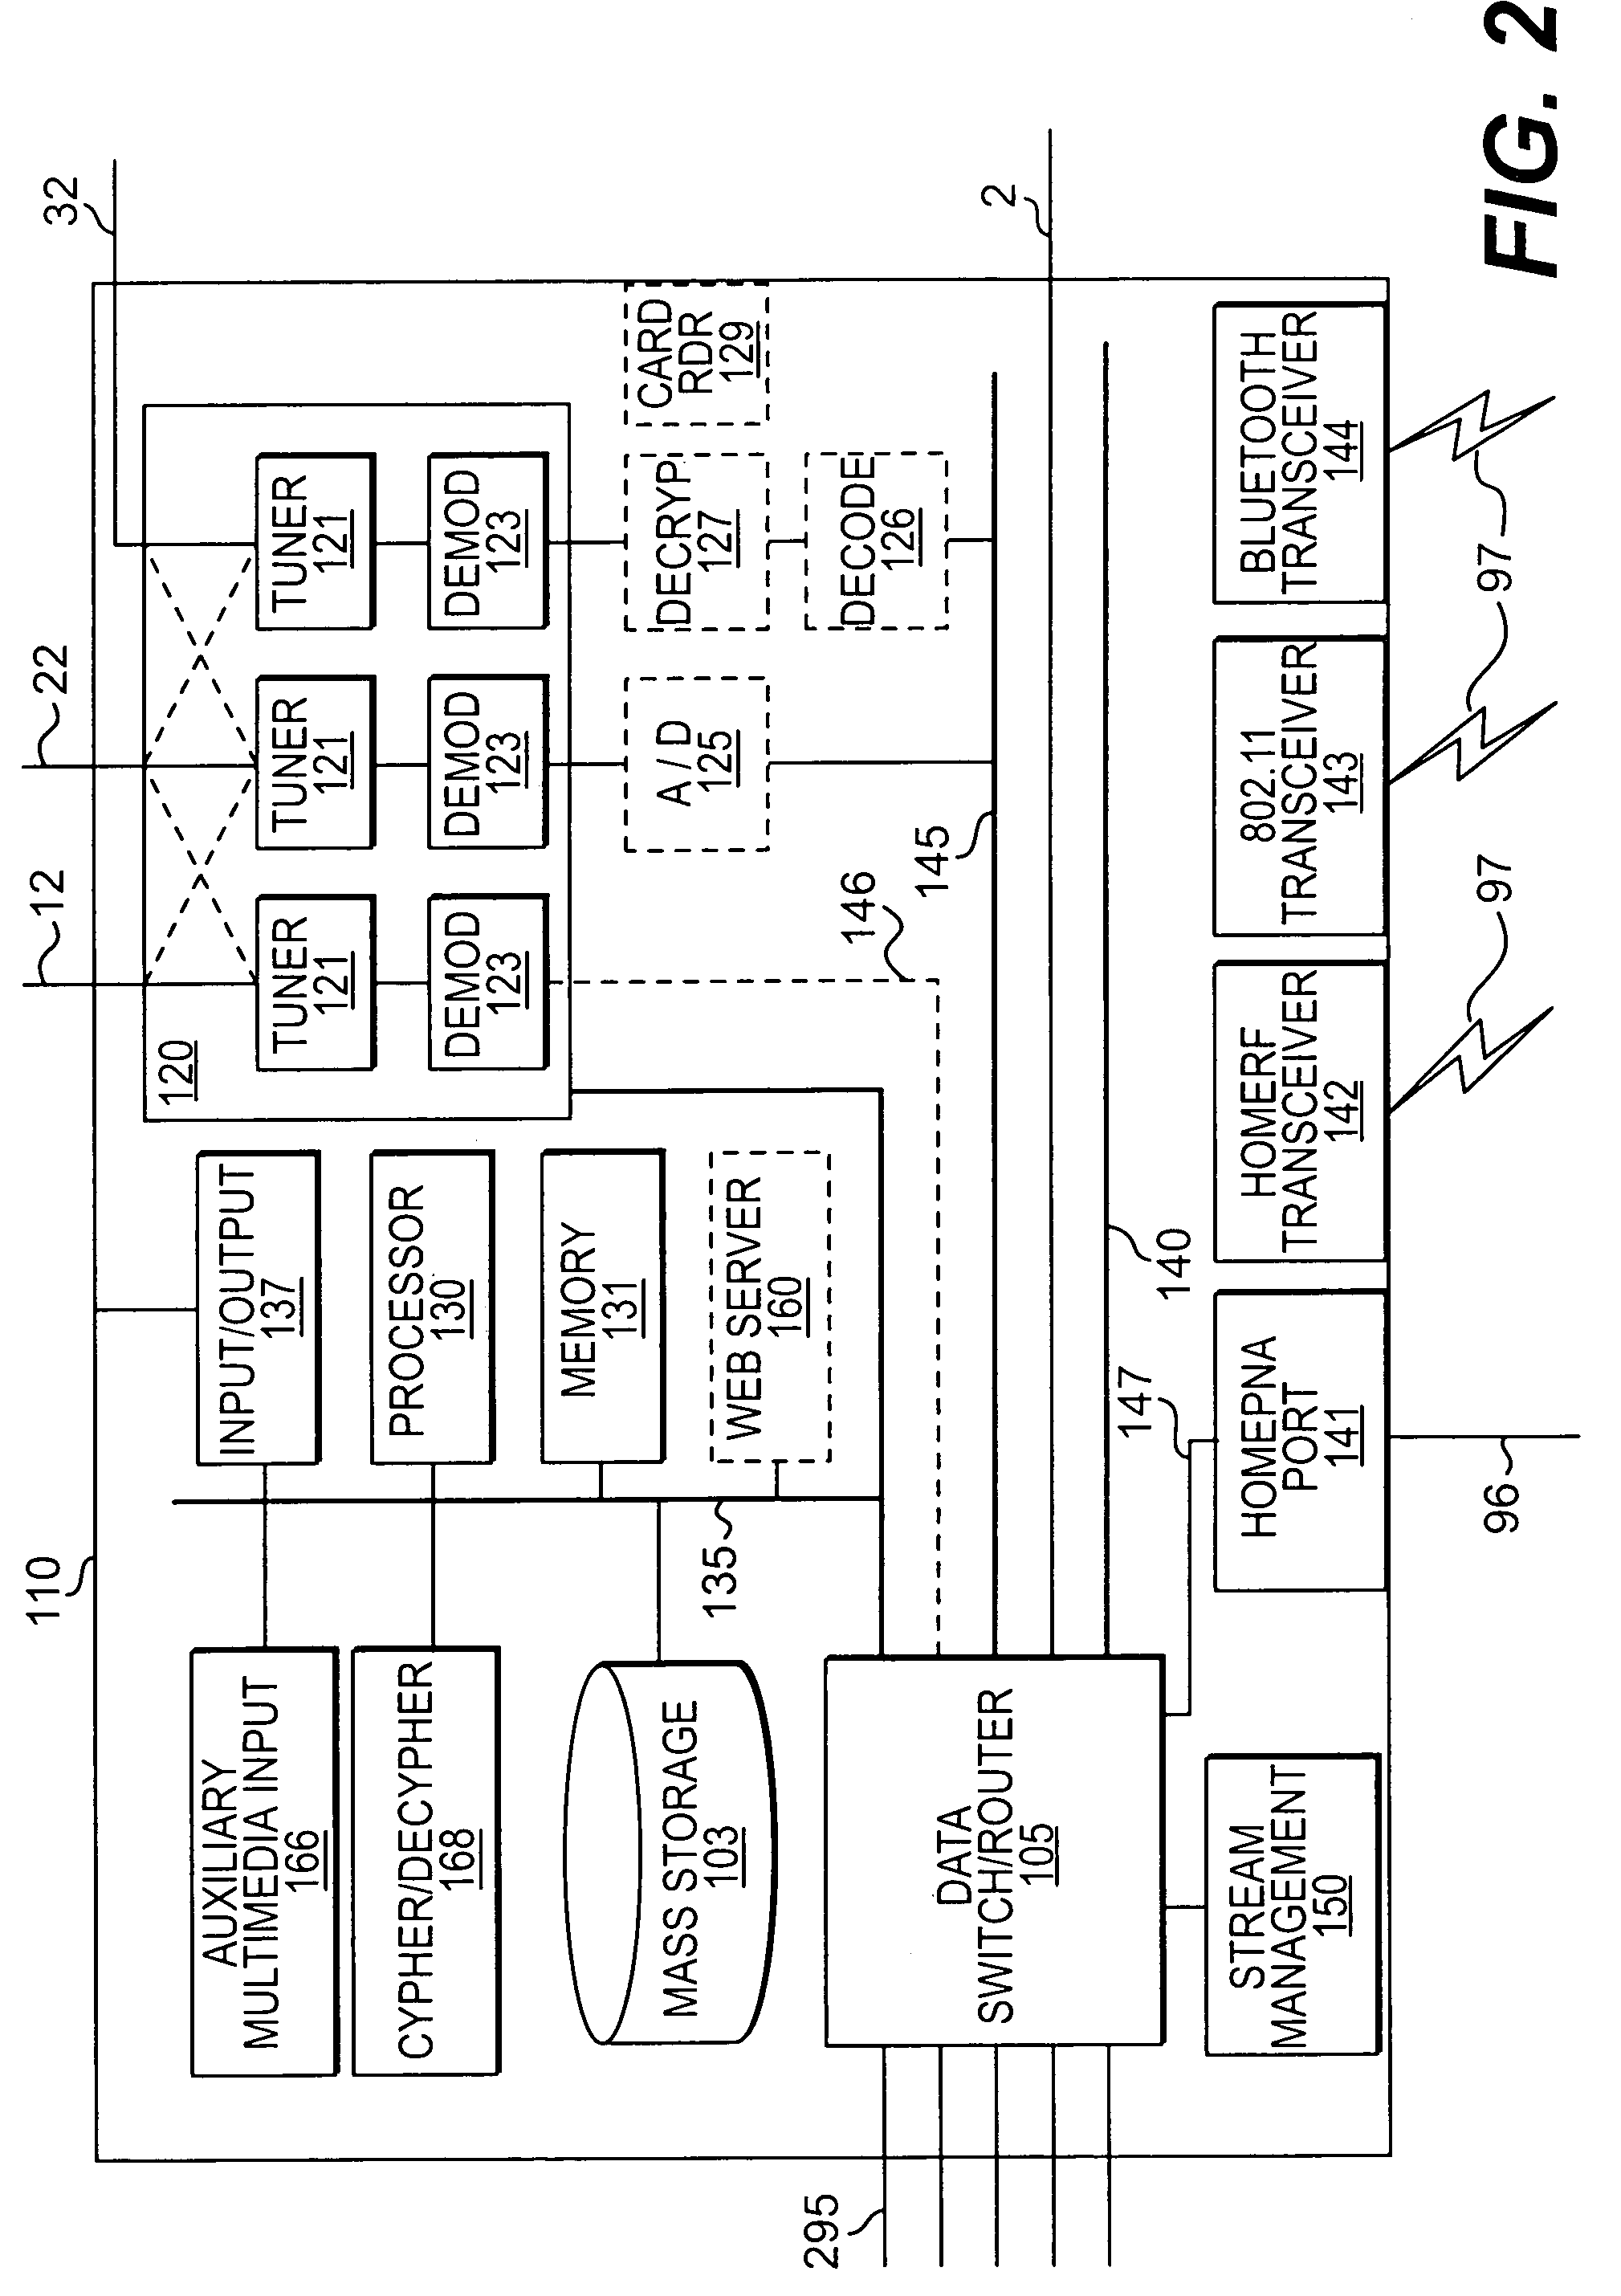 System and method for multimedia on demand services